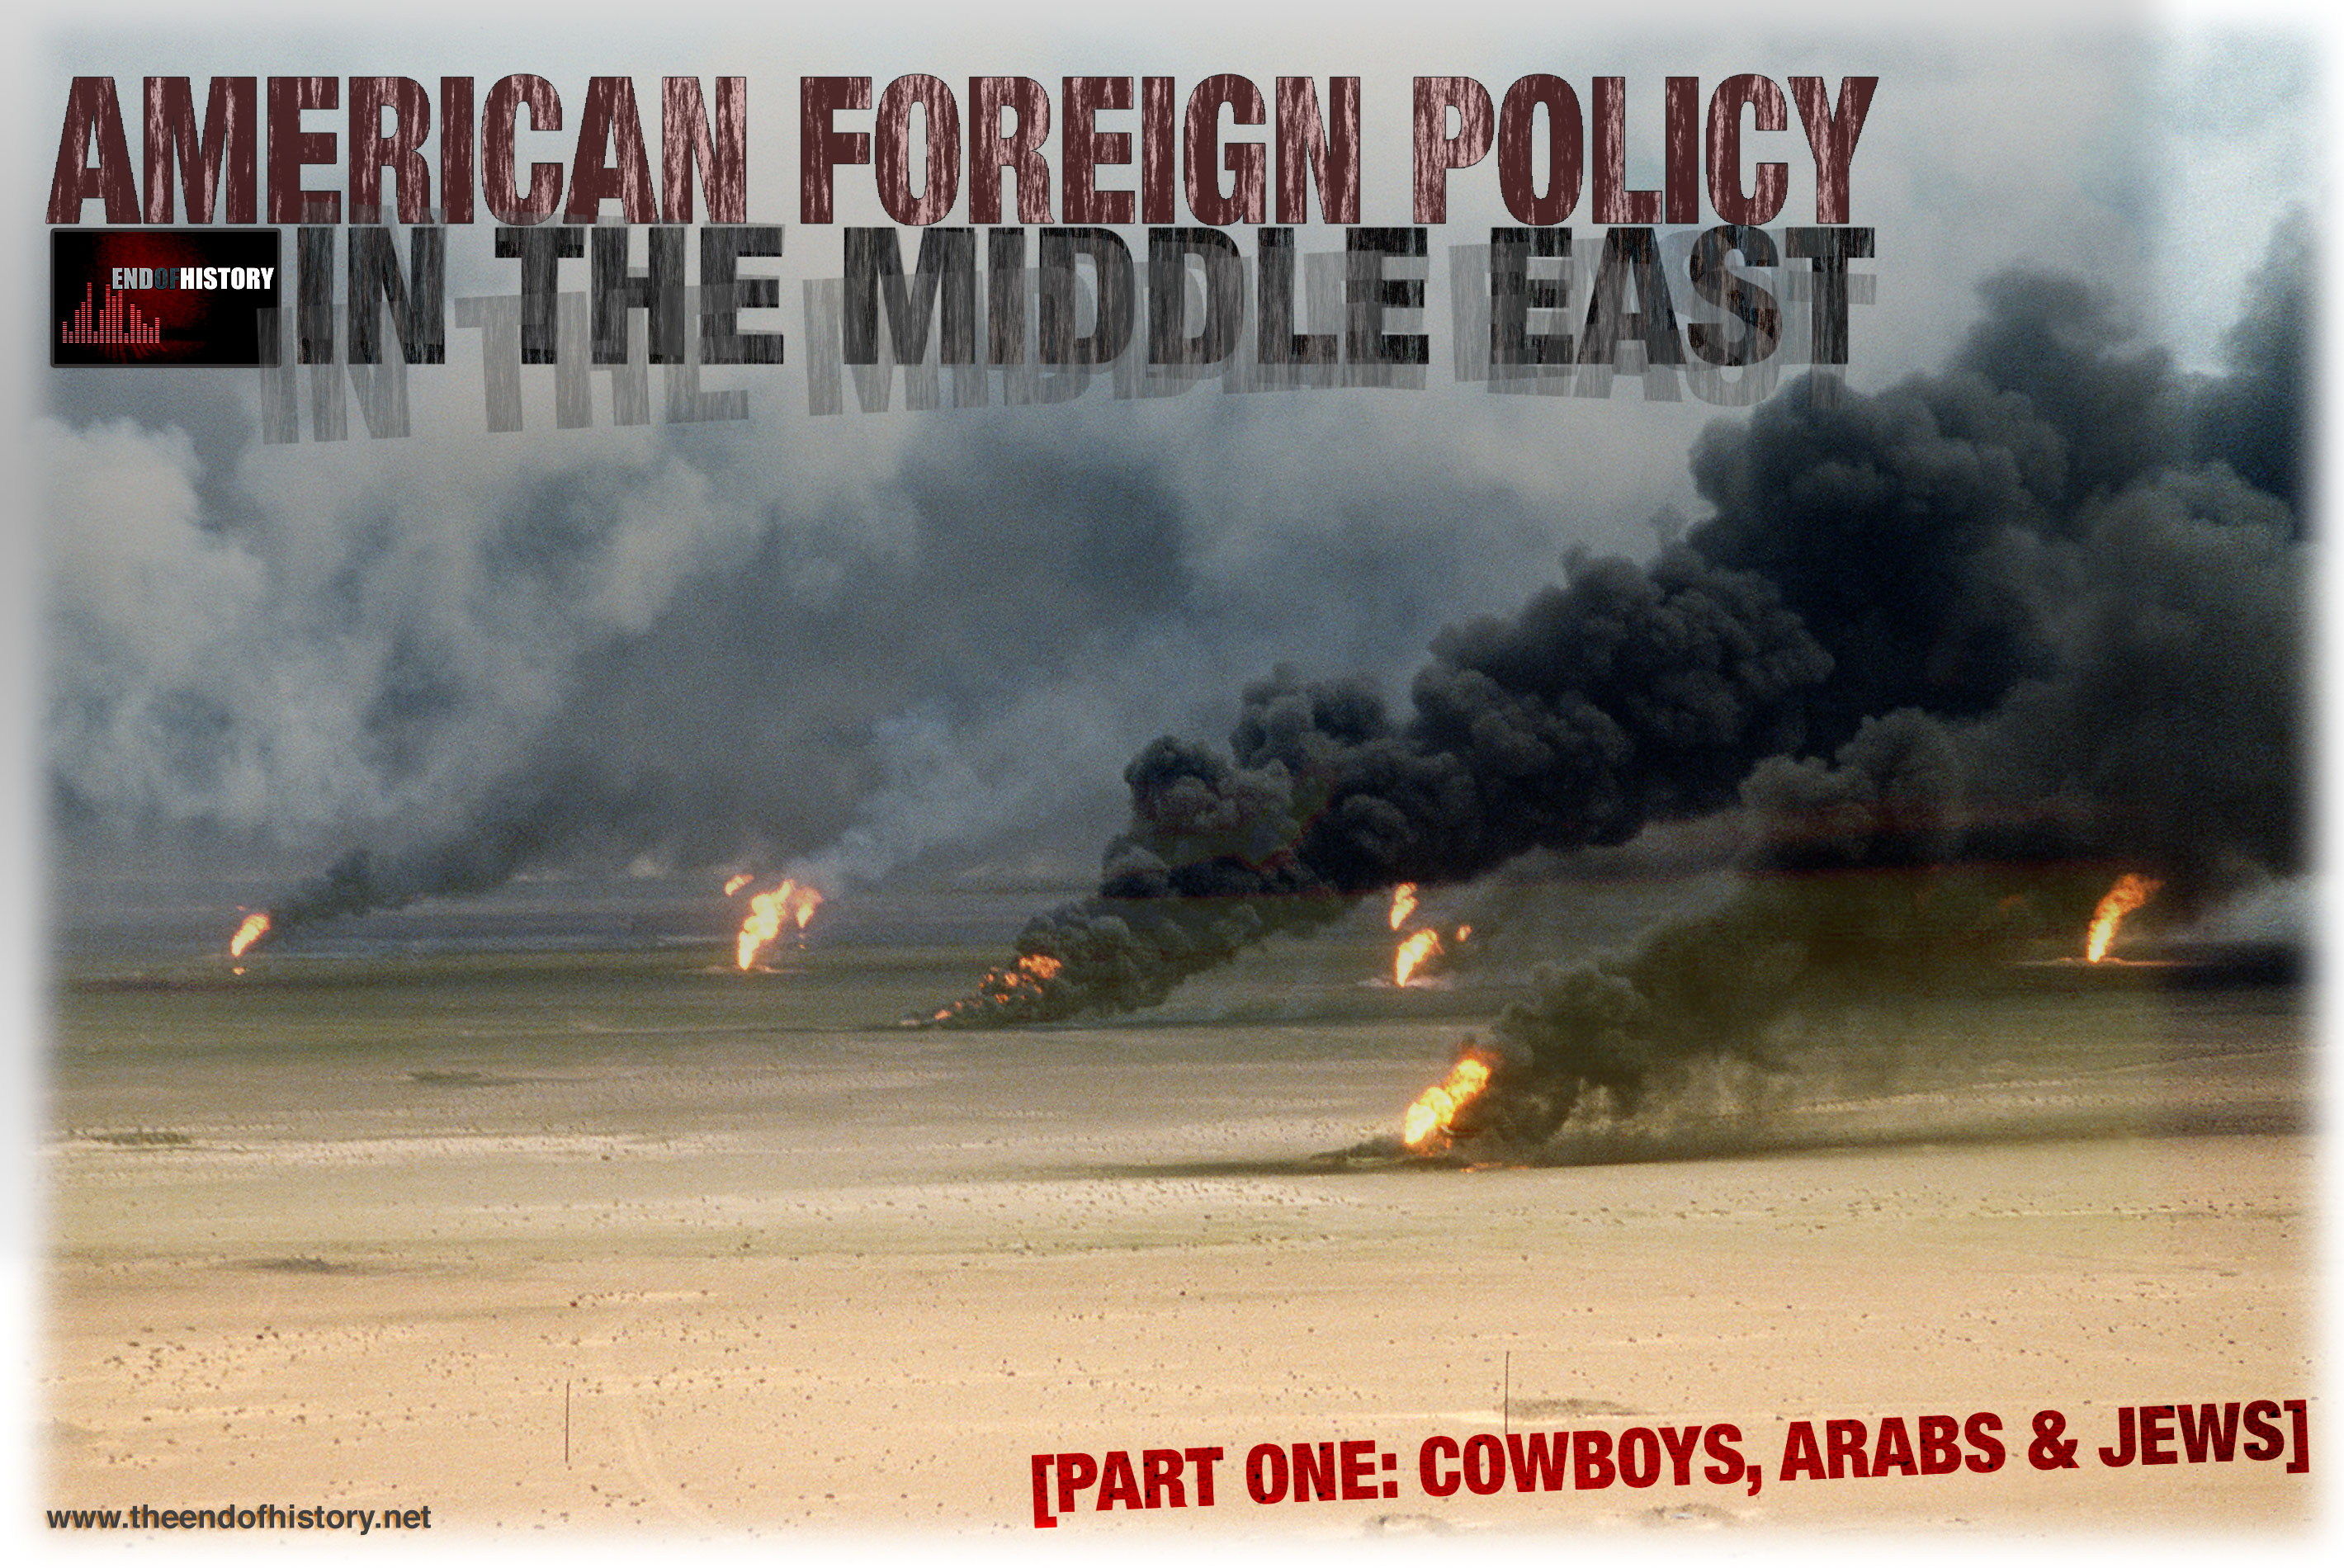 The History of American Foreign Policy in the Middle East